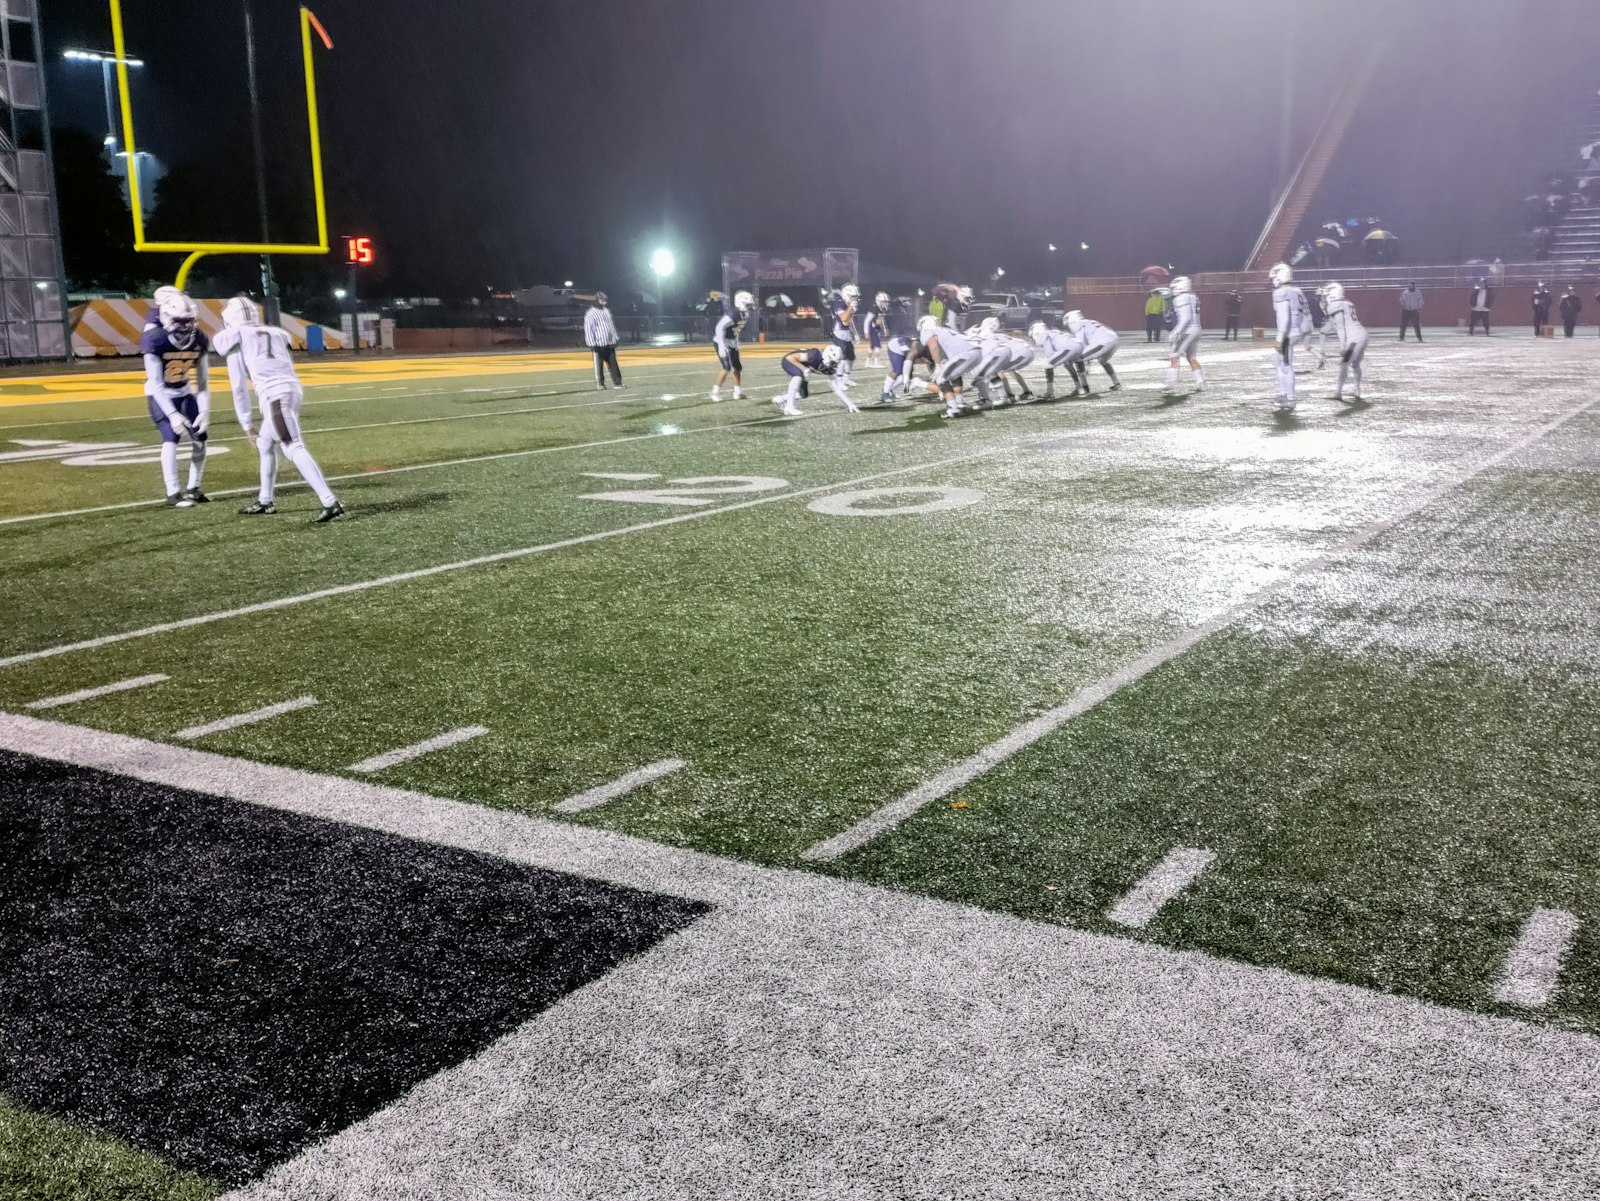 A game-long rain and wind combined to make miserable playing conditions when De La Salle and University of Detroit Jesuit met on the gridiron for the third time in four weeks. The No. 1-ranked Pilots scored early and often for a 44-0 victory. “It was the worst case scenario for us,” said U of D coach Matt Lewis.